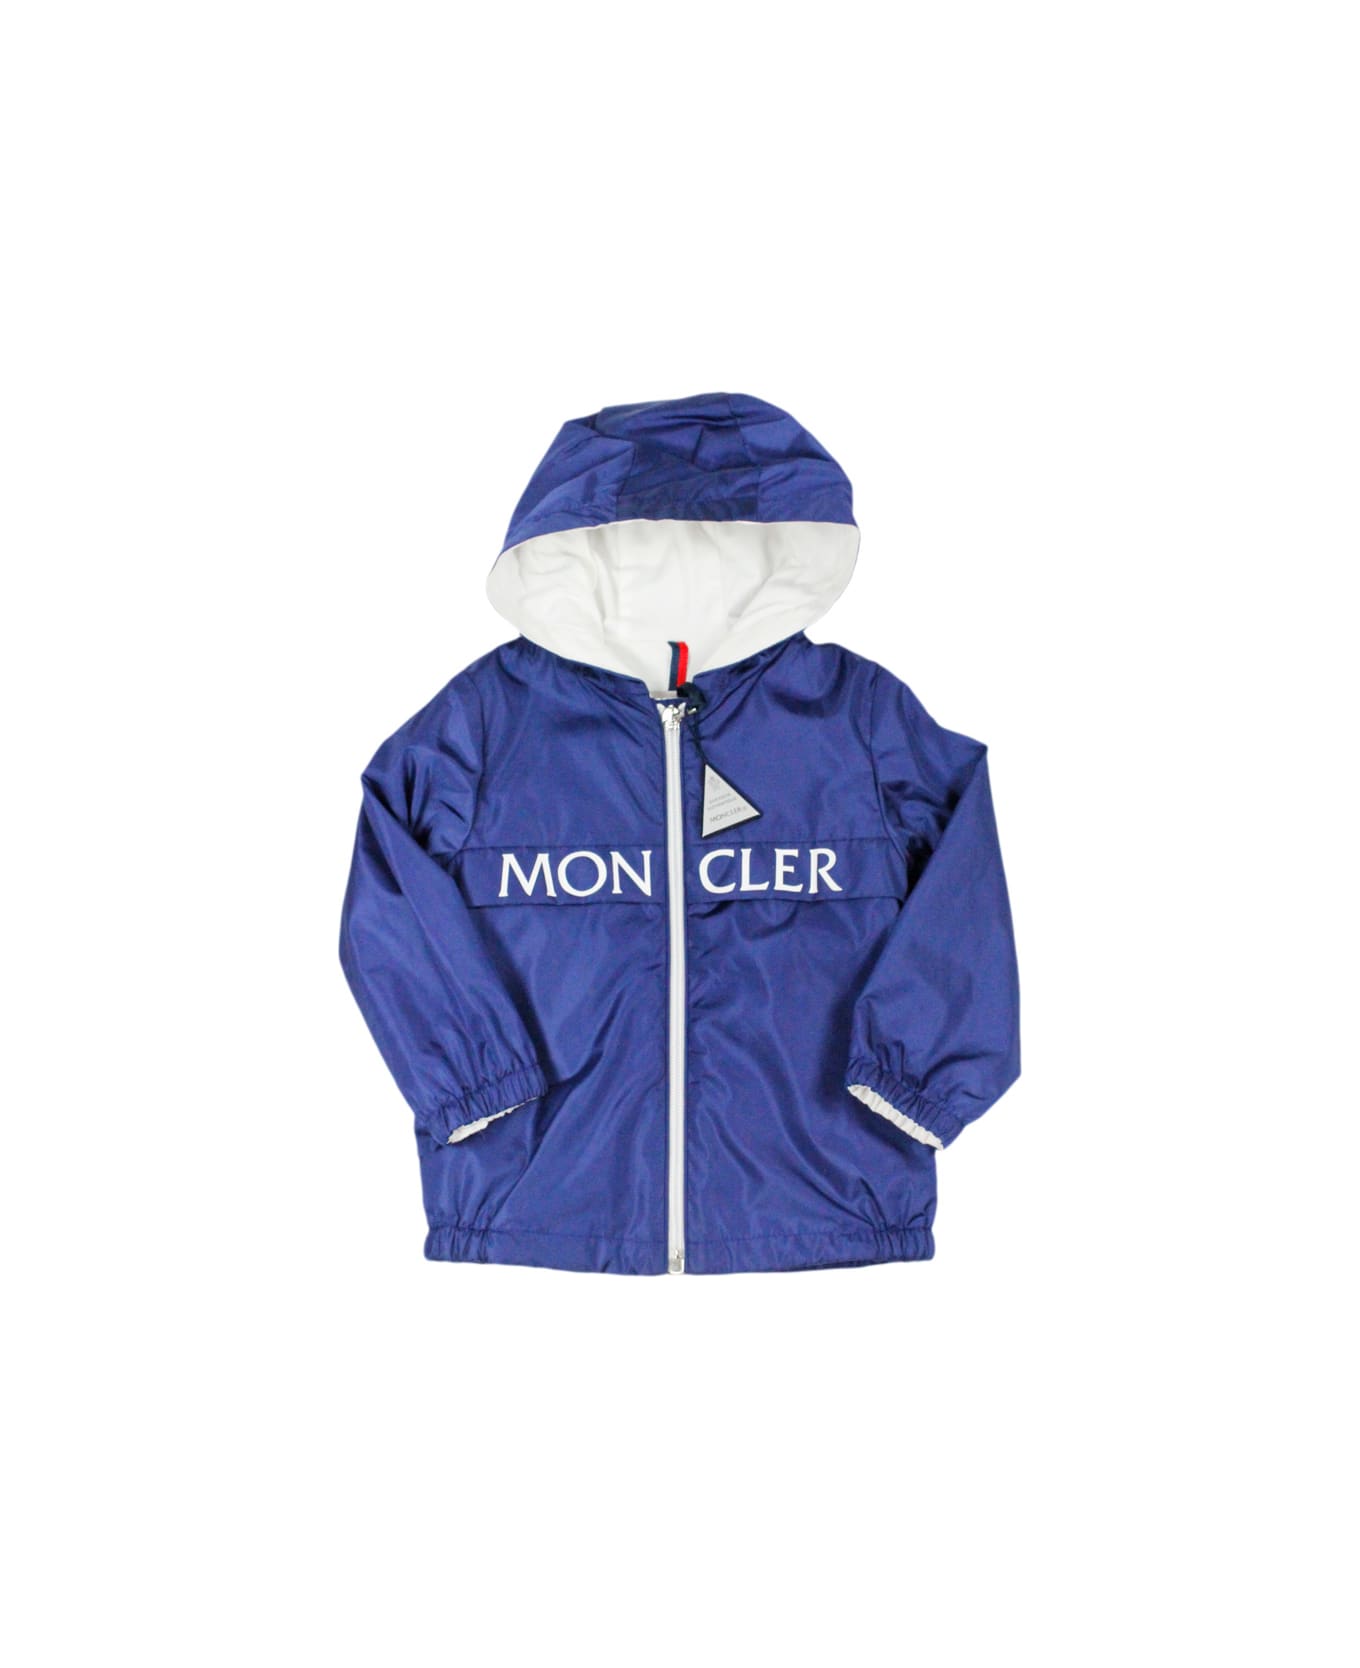 Moncler Erdvile Jacket In Light Nylon With Hood And Zip Closure With Logo Printed On The Chest, Internally Lined In Jersey. - Blu コート＆ジャケット